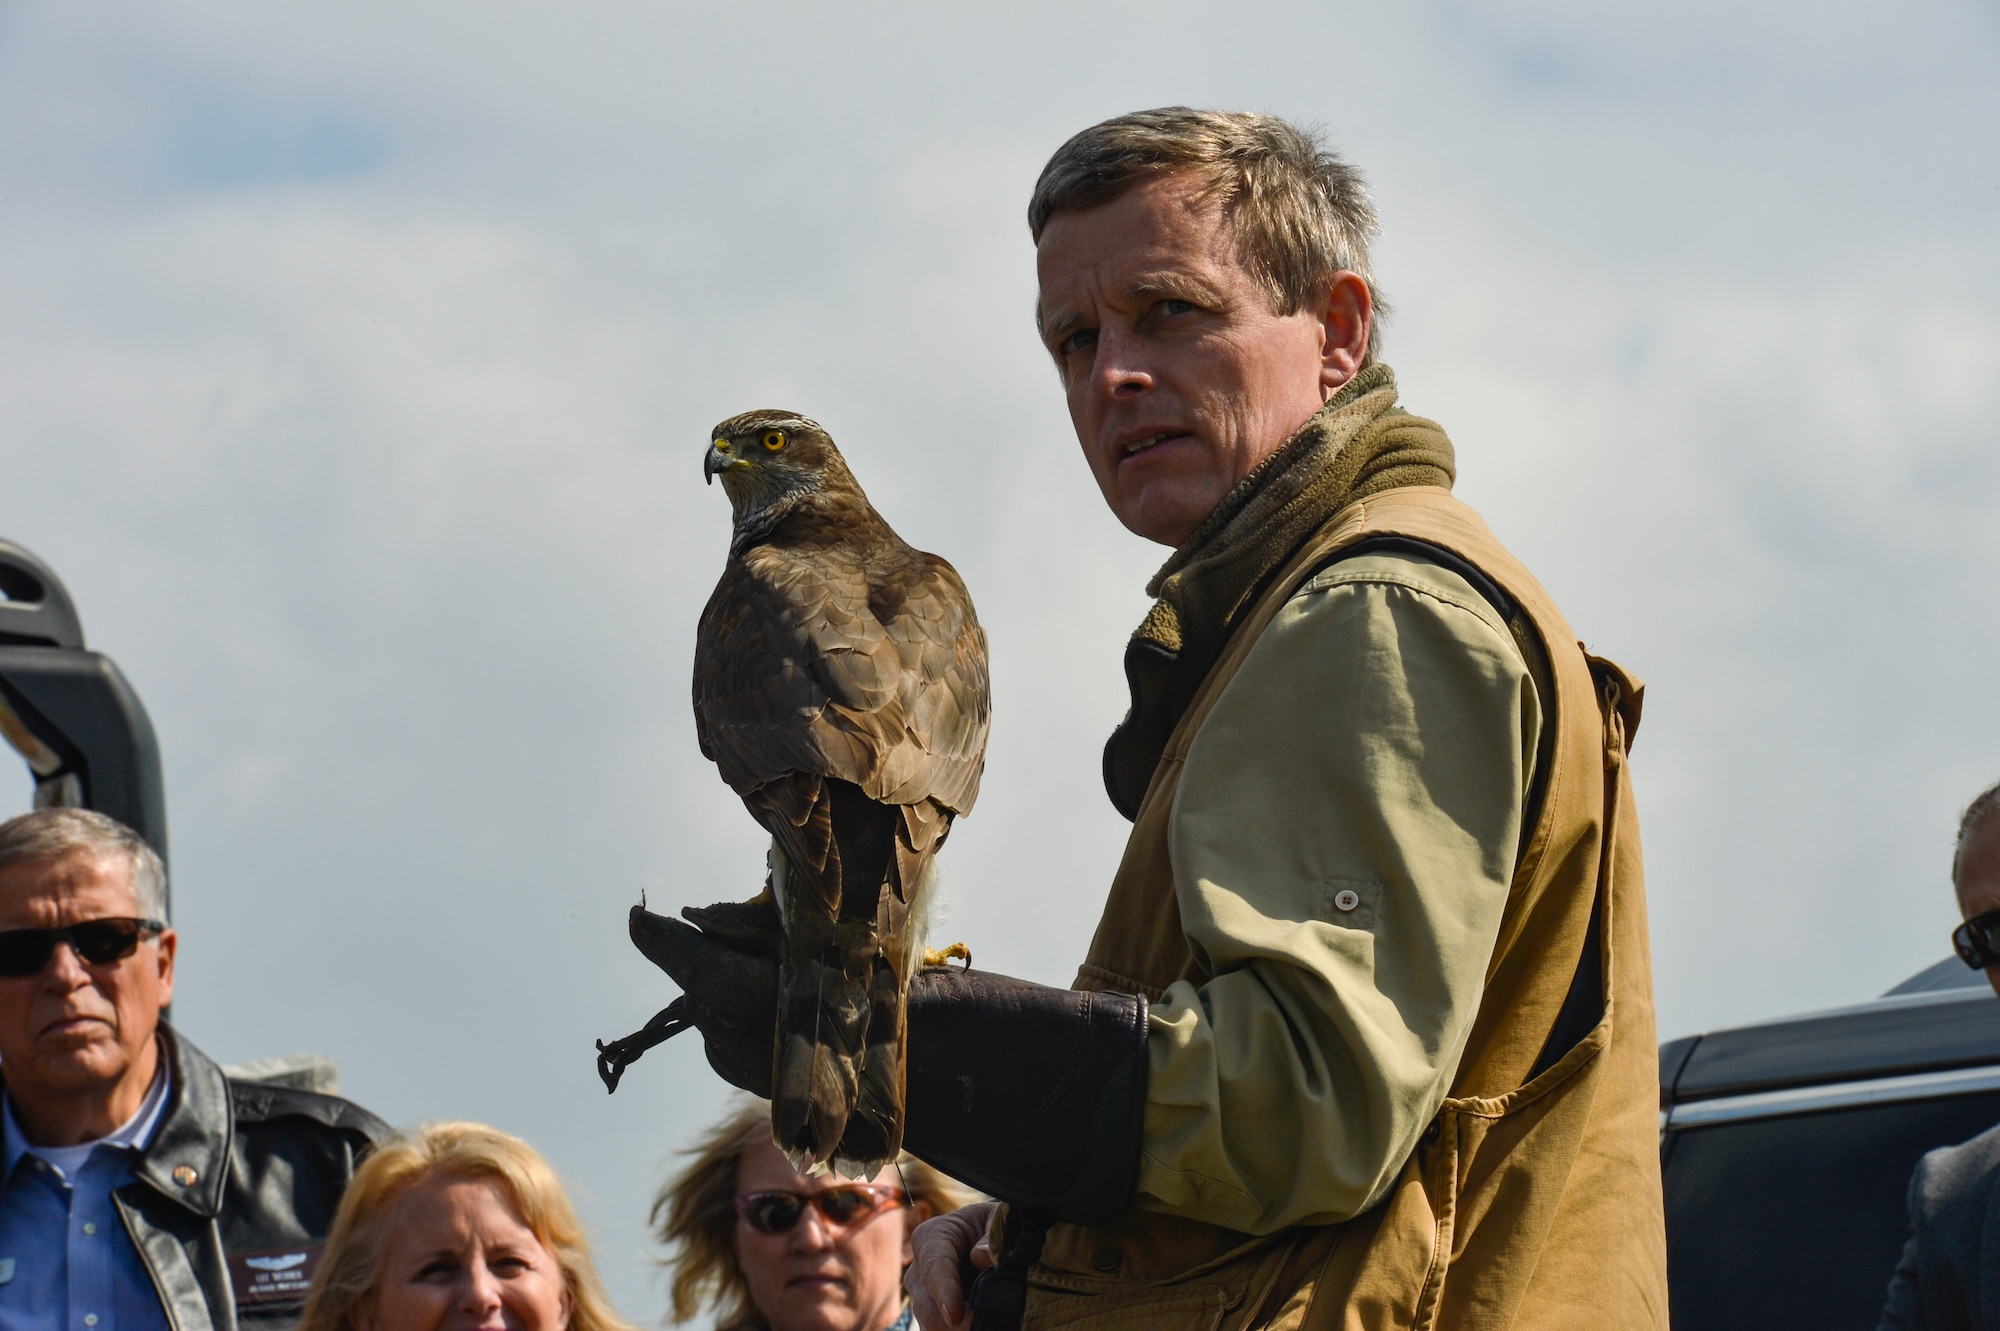 Jens Fleer, a falconer, shows his gyrfalcon used for flightline bird abatement on Spangdahlem Air Base, Germany, to a group of Air Force civic leaders April 19, 2016, during a weeklong civic leader trip to several bases in Europe. Air Force civic leaders are unpaid advisers, key communicators and advocates for the Air Force. (U.S. Air Force photo/Tech. Sgt. Joshua DeMotts)